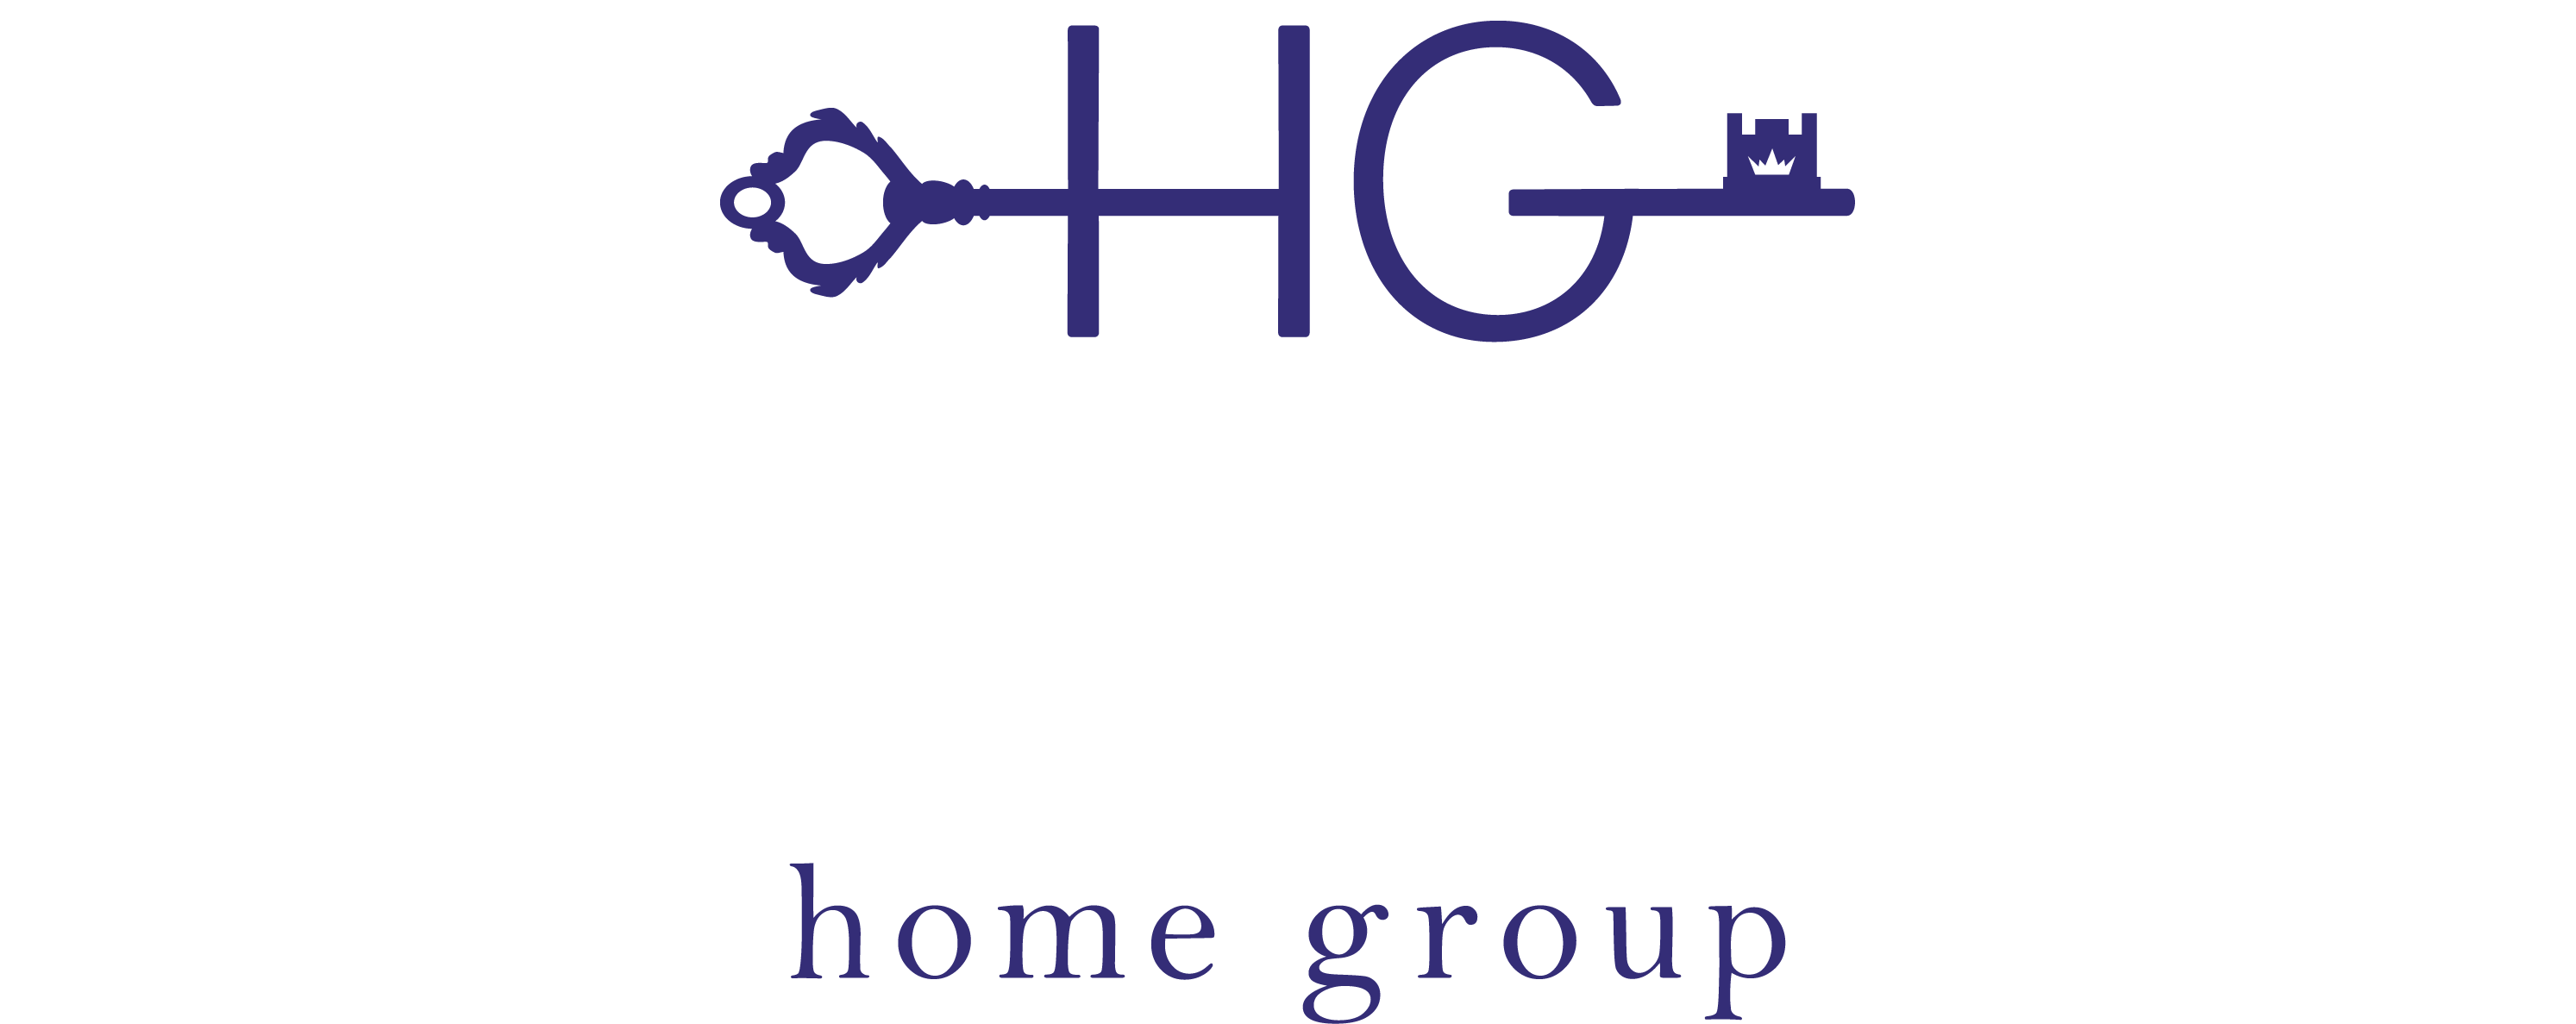 Hghg Sticker by HG Home Group for iOS & Android | GIPHY